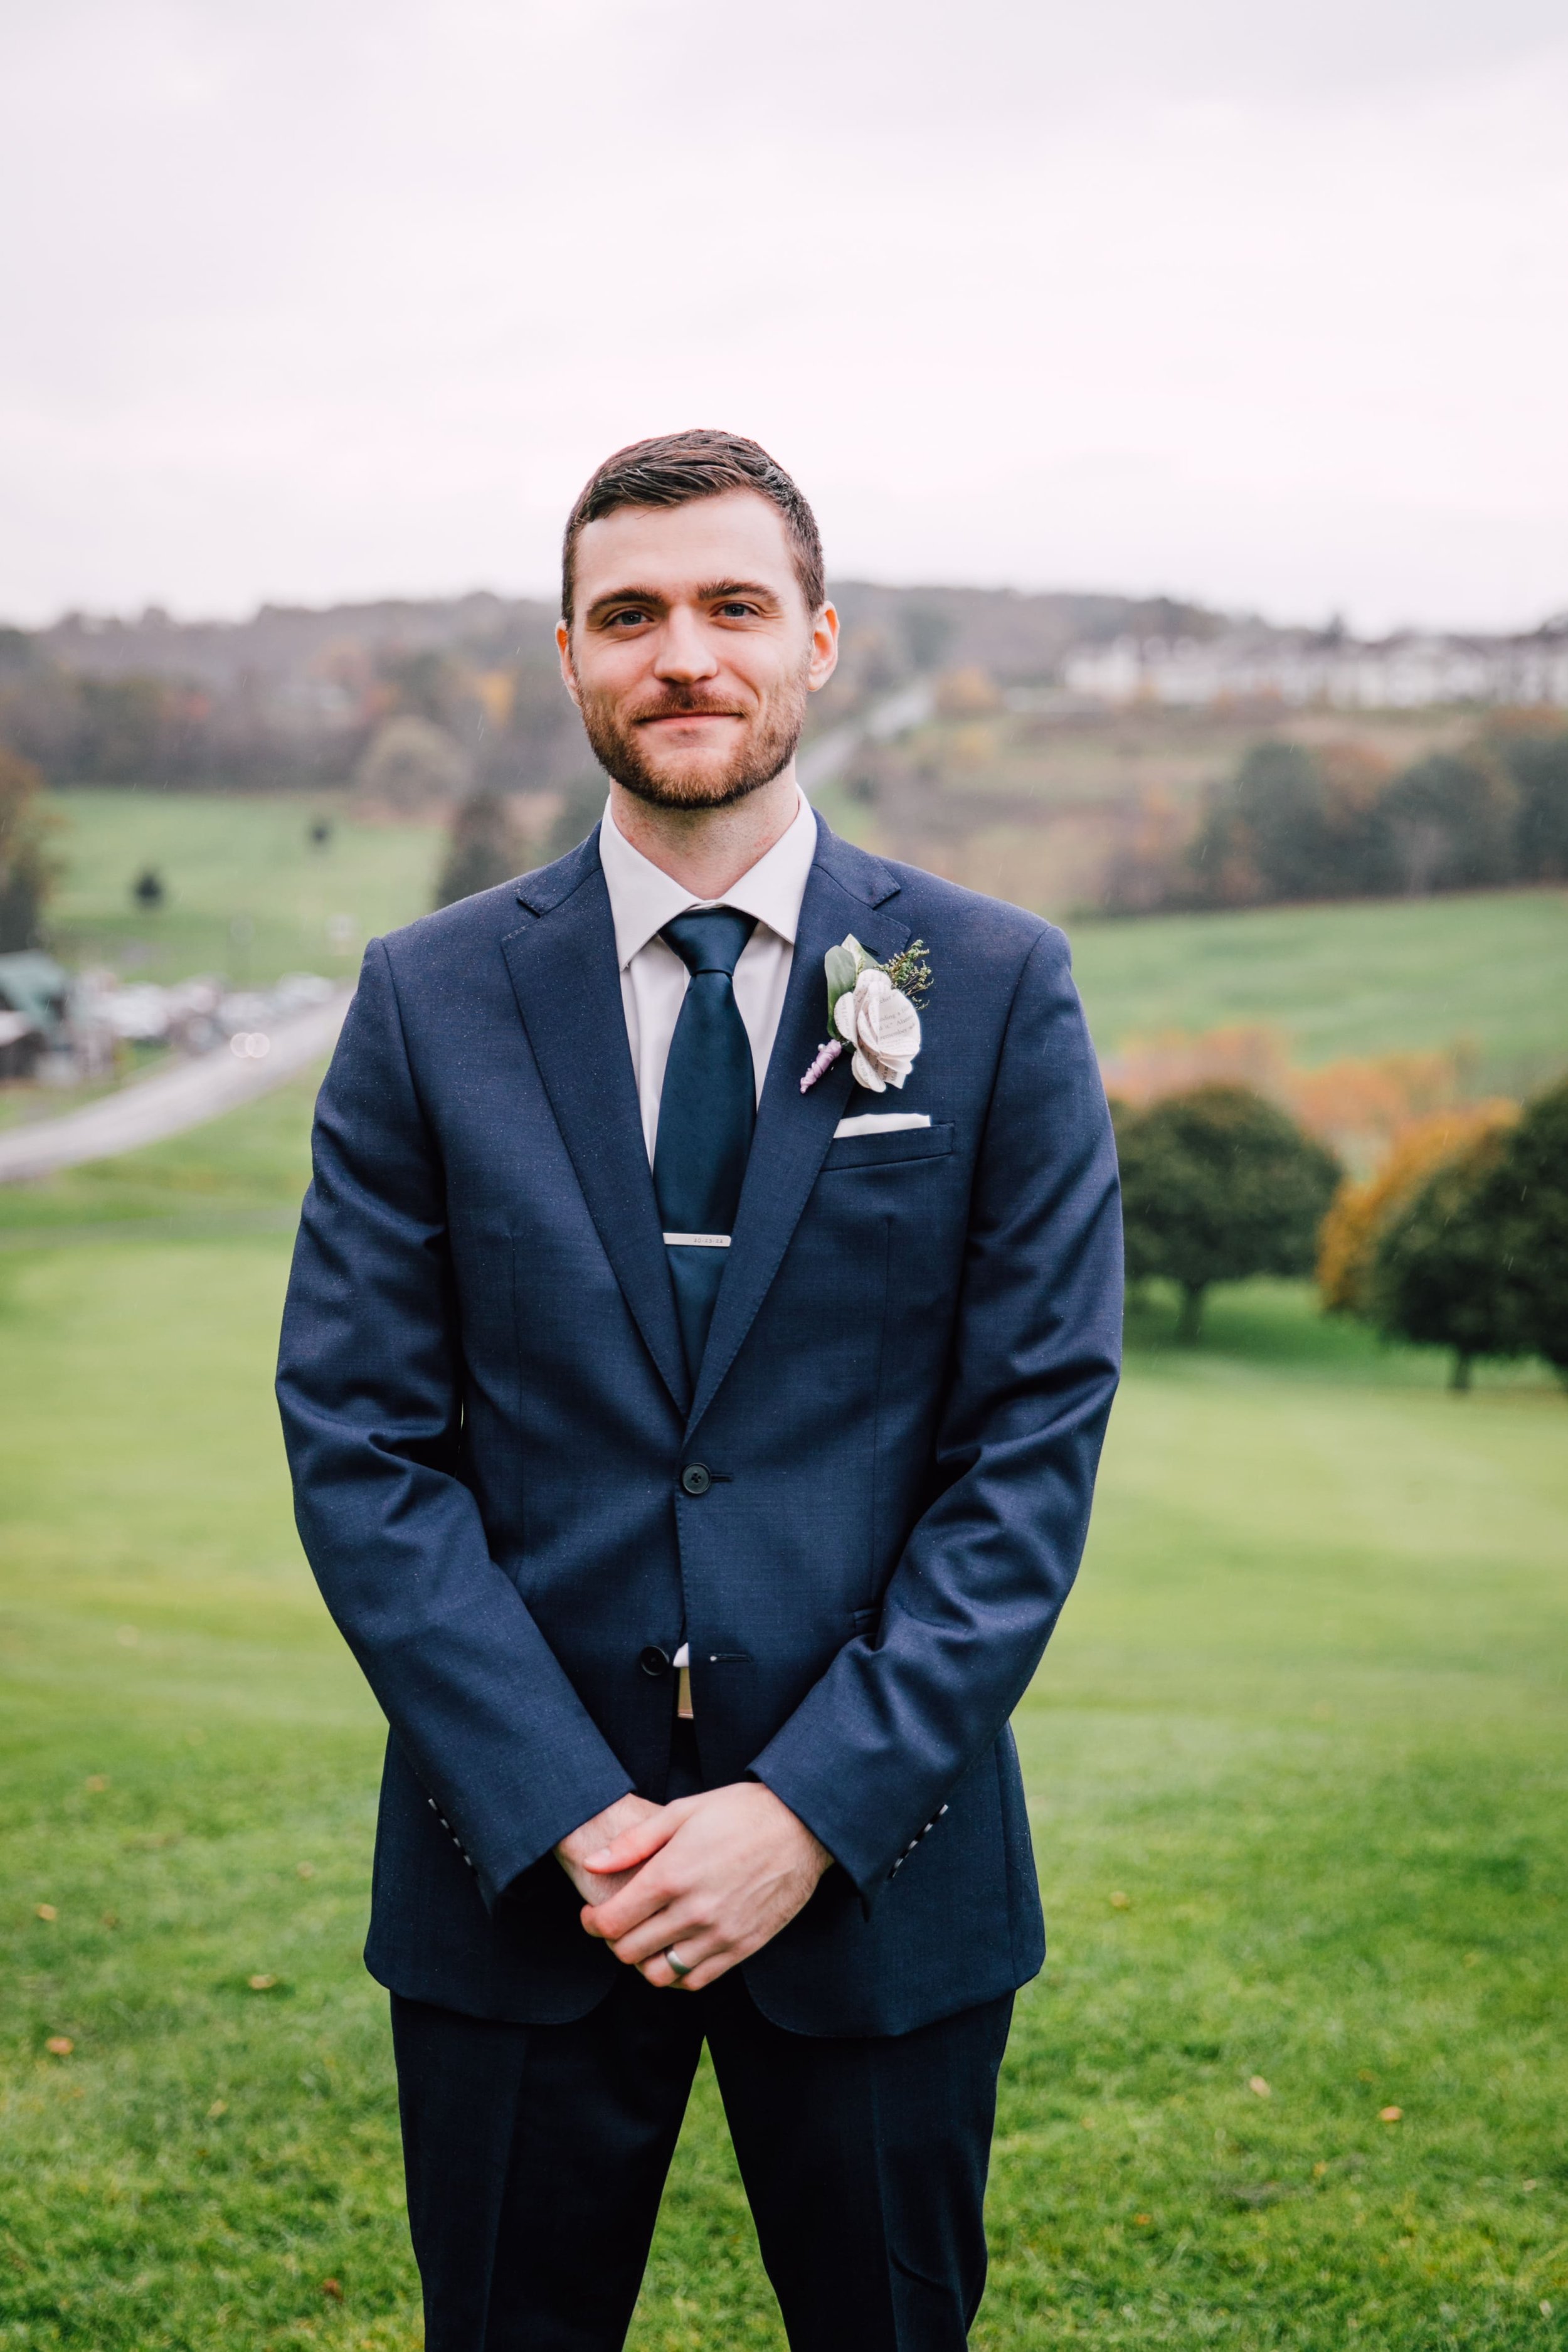  the groom smiles as he stands in front of an open field with fall trees behind him during their fall wedding portraits 